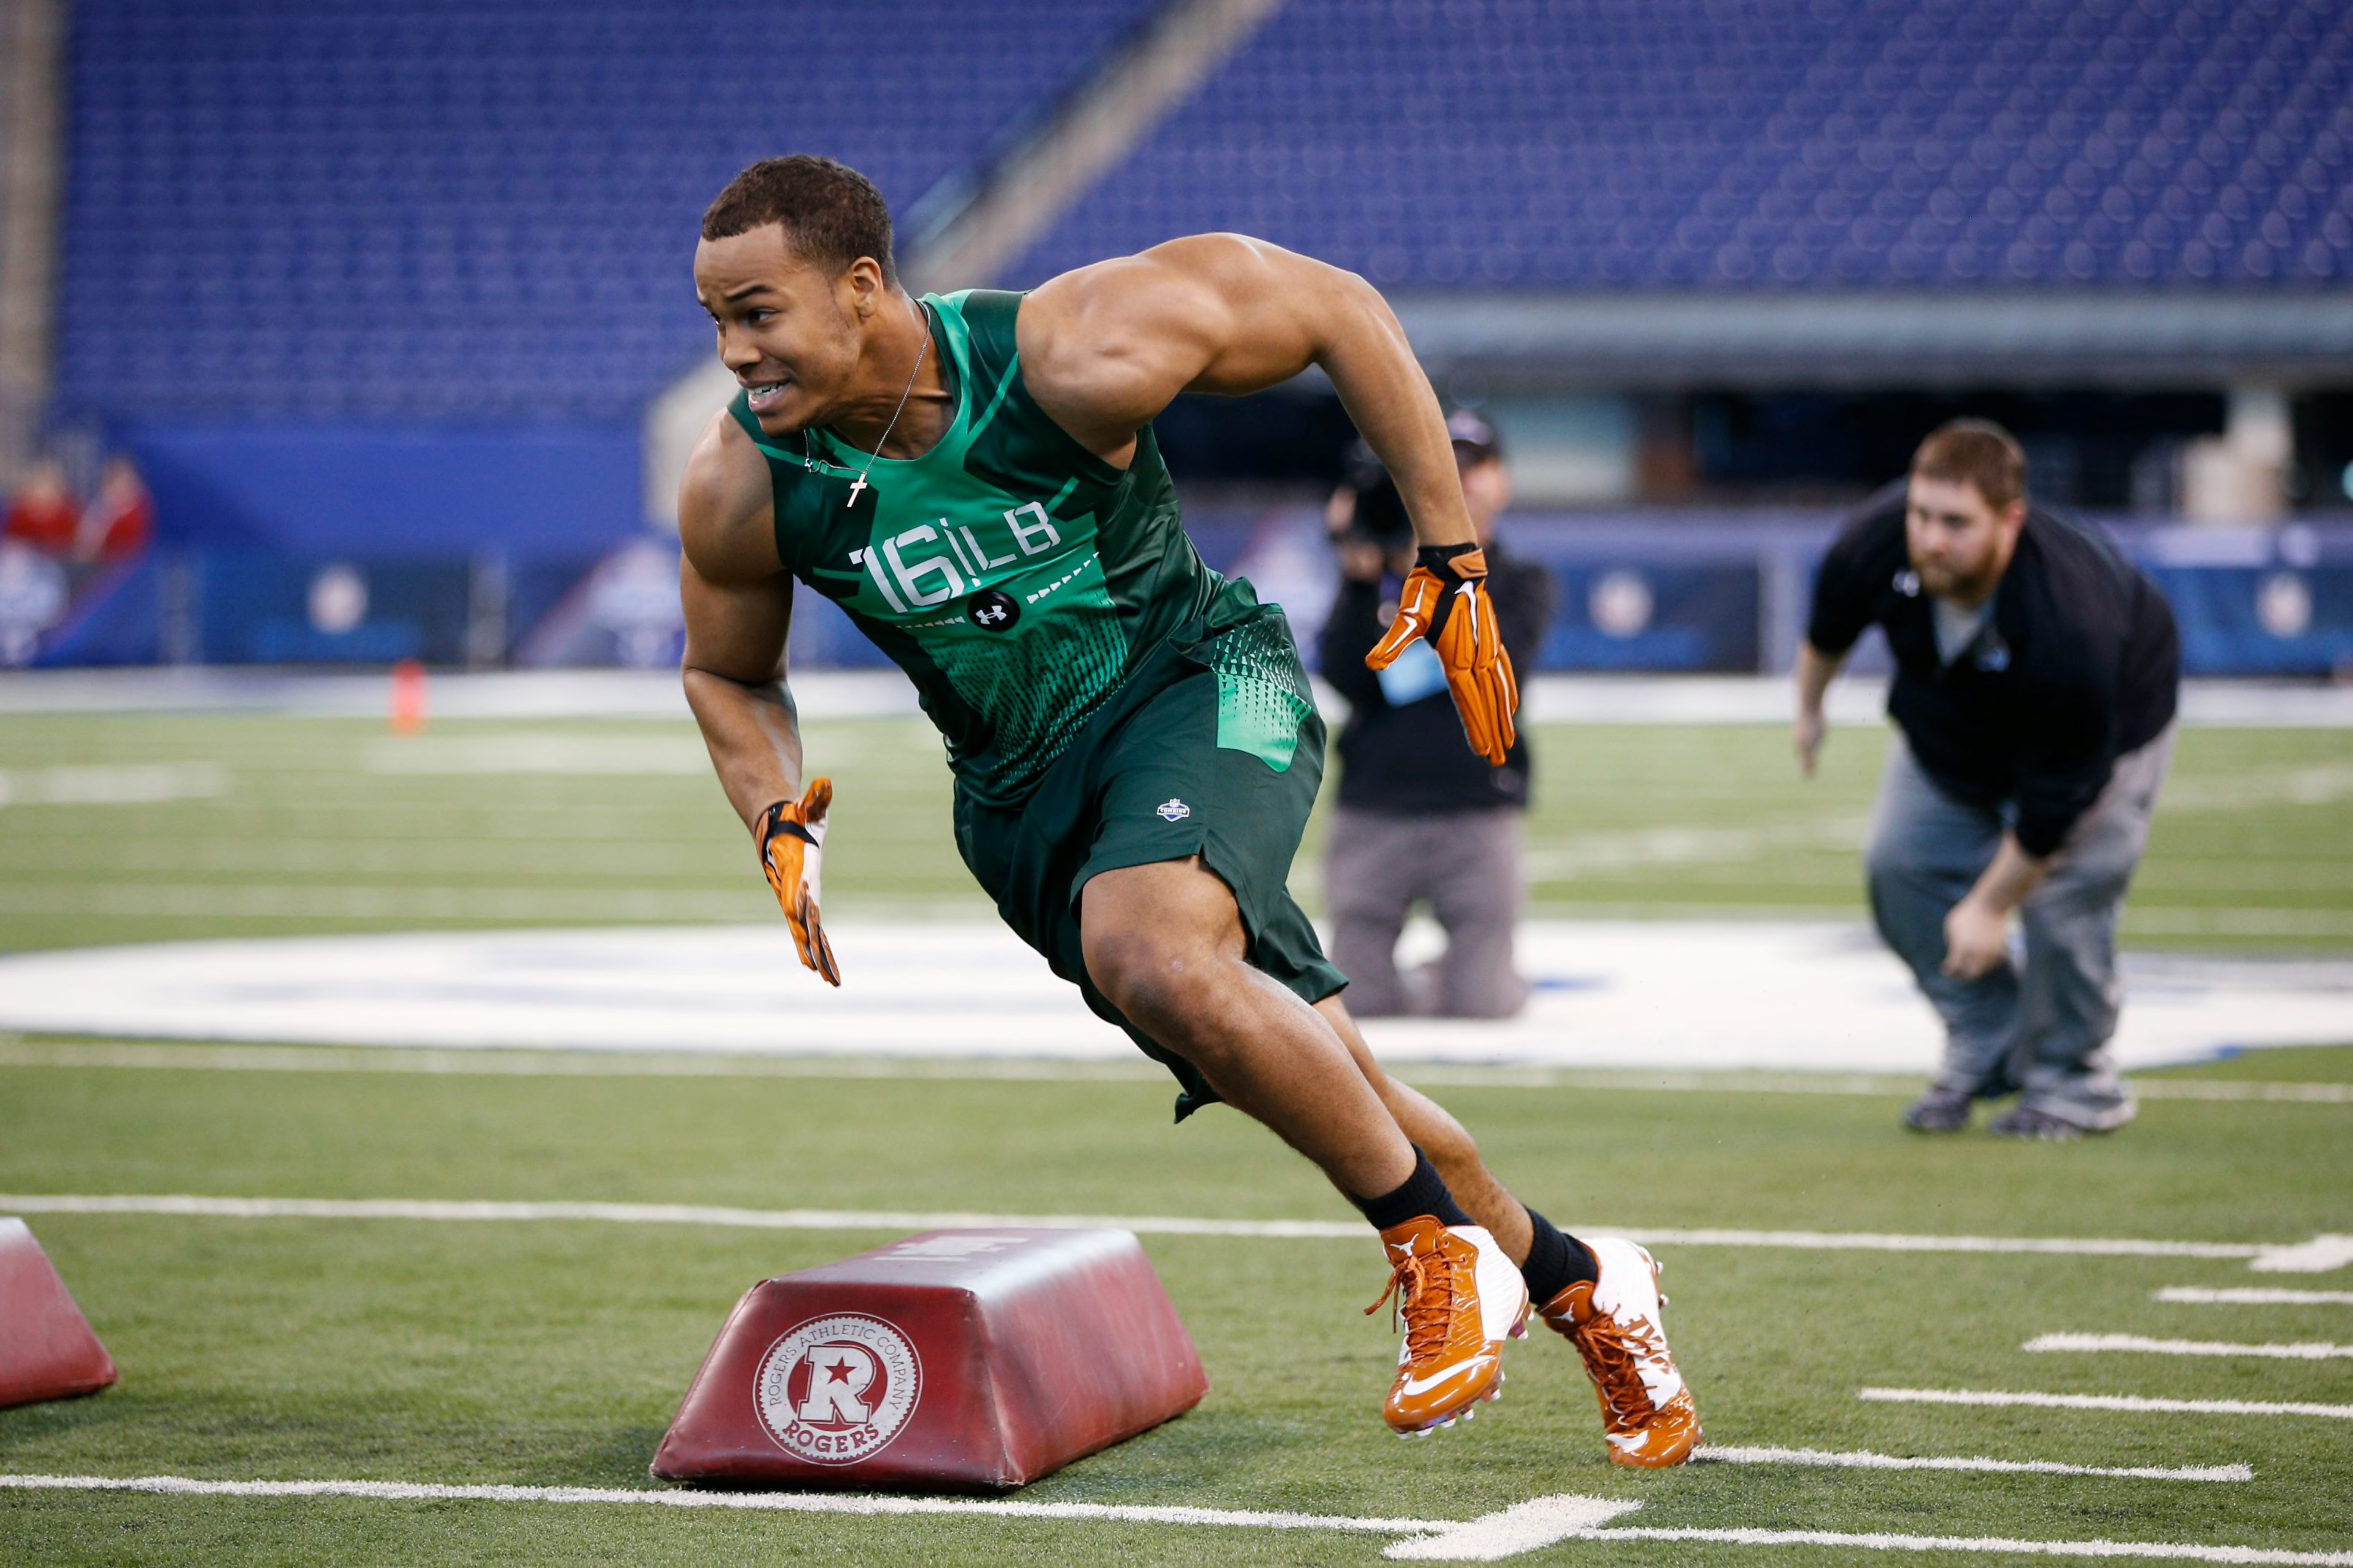 Texas LB Jordan Hicks impresses with athleticism at NFL Scouting